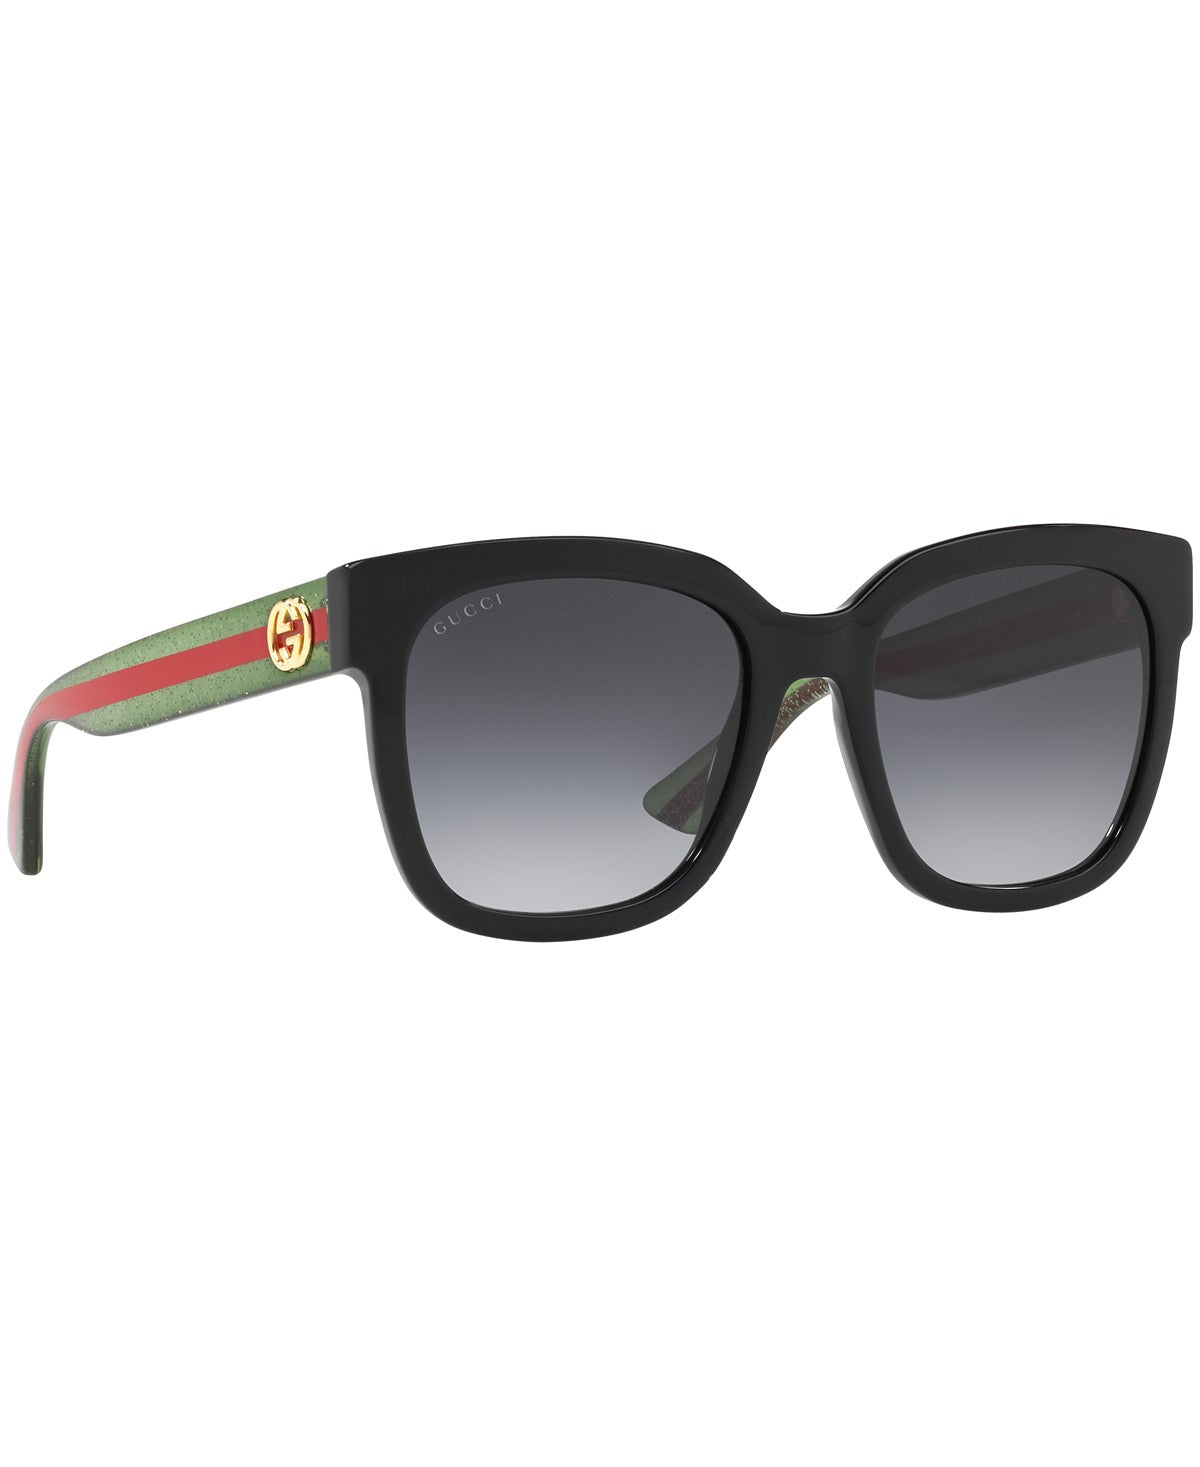 bryder daggry sydvest overlap Gucci Sunglasses GG0034S 002 Black-Green-Red / Grey Gradient Lens - nyIwear